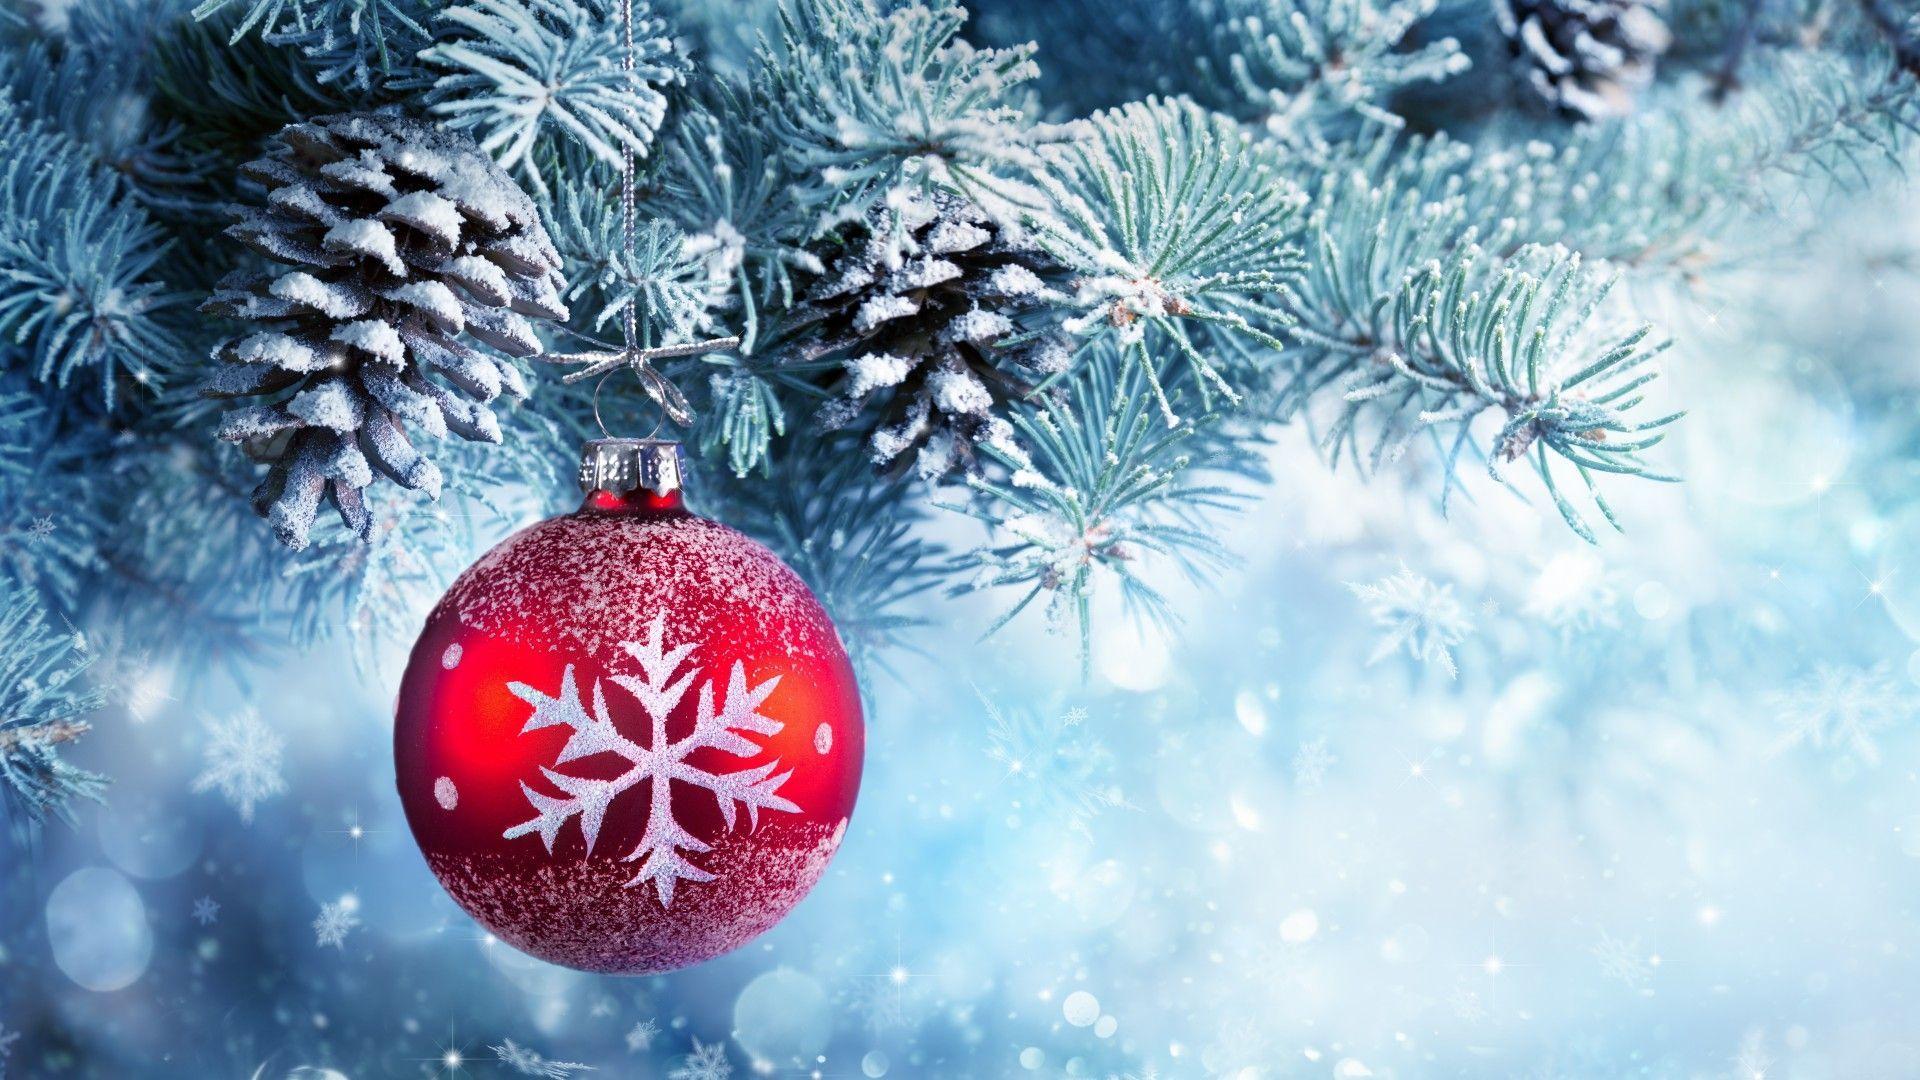 Winter Christmas Wallpapers - Top Free